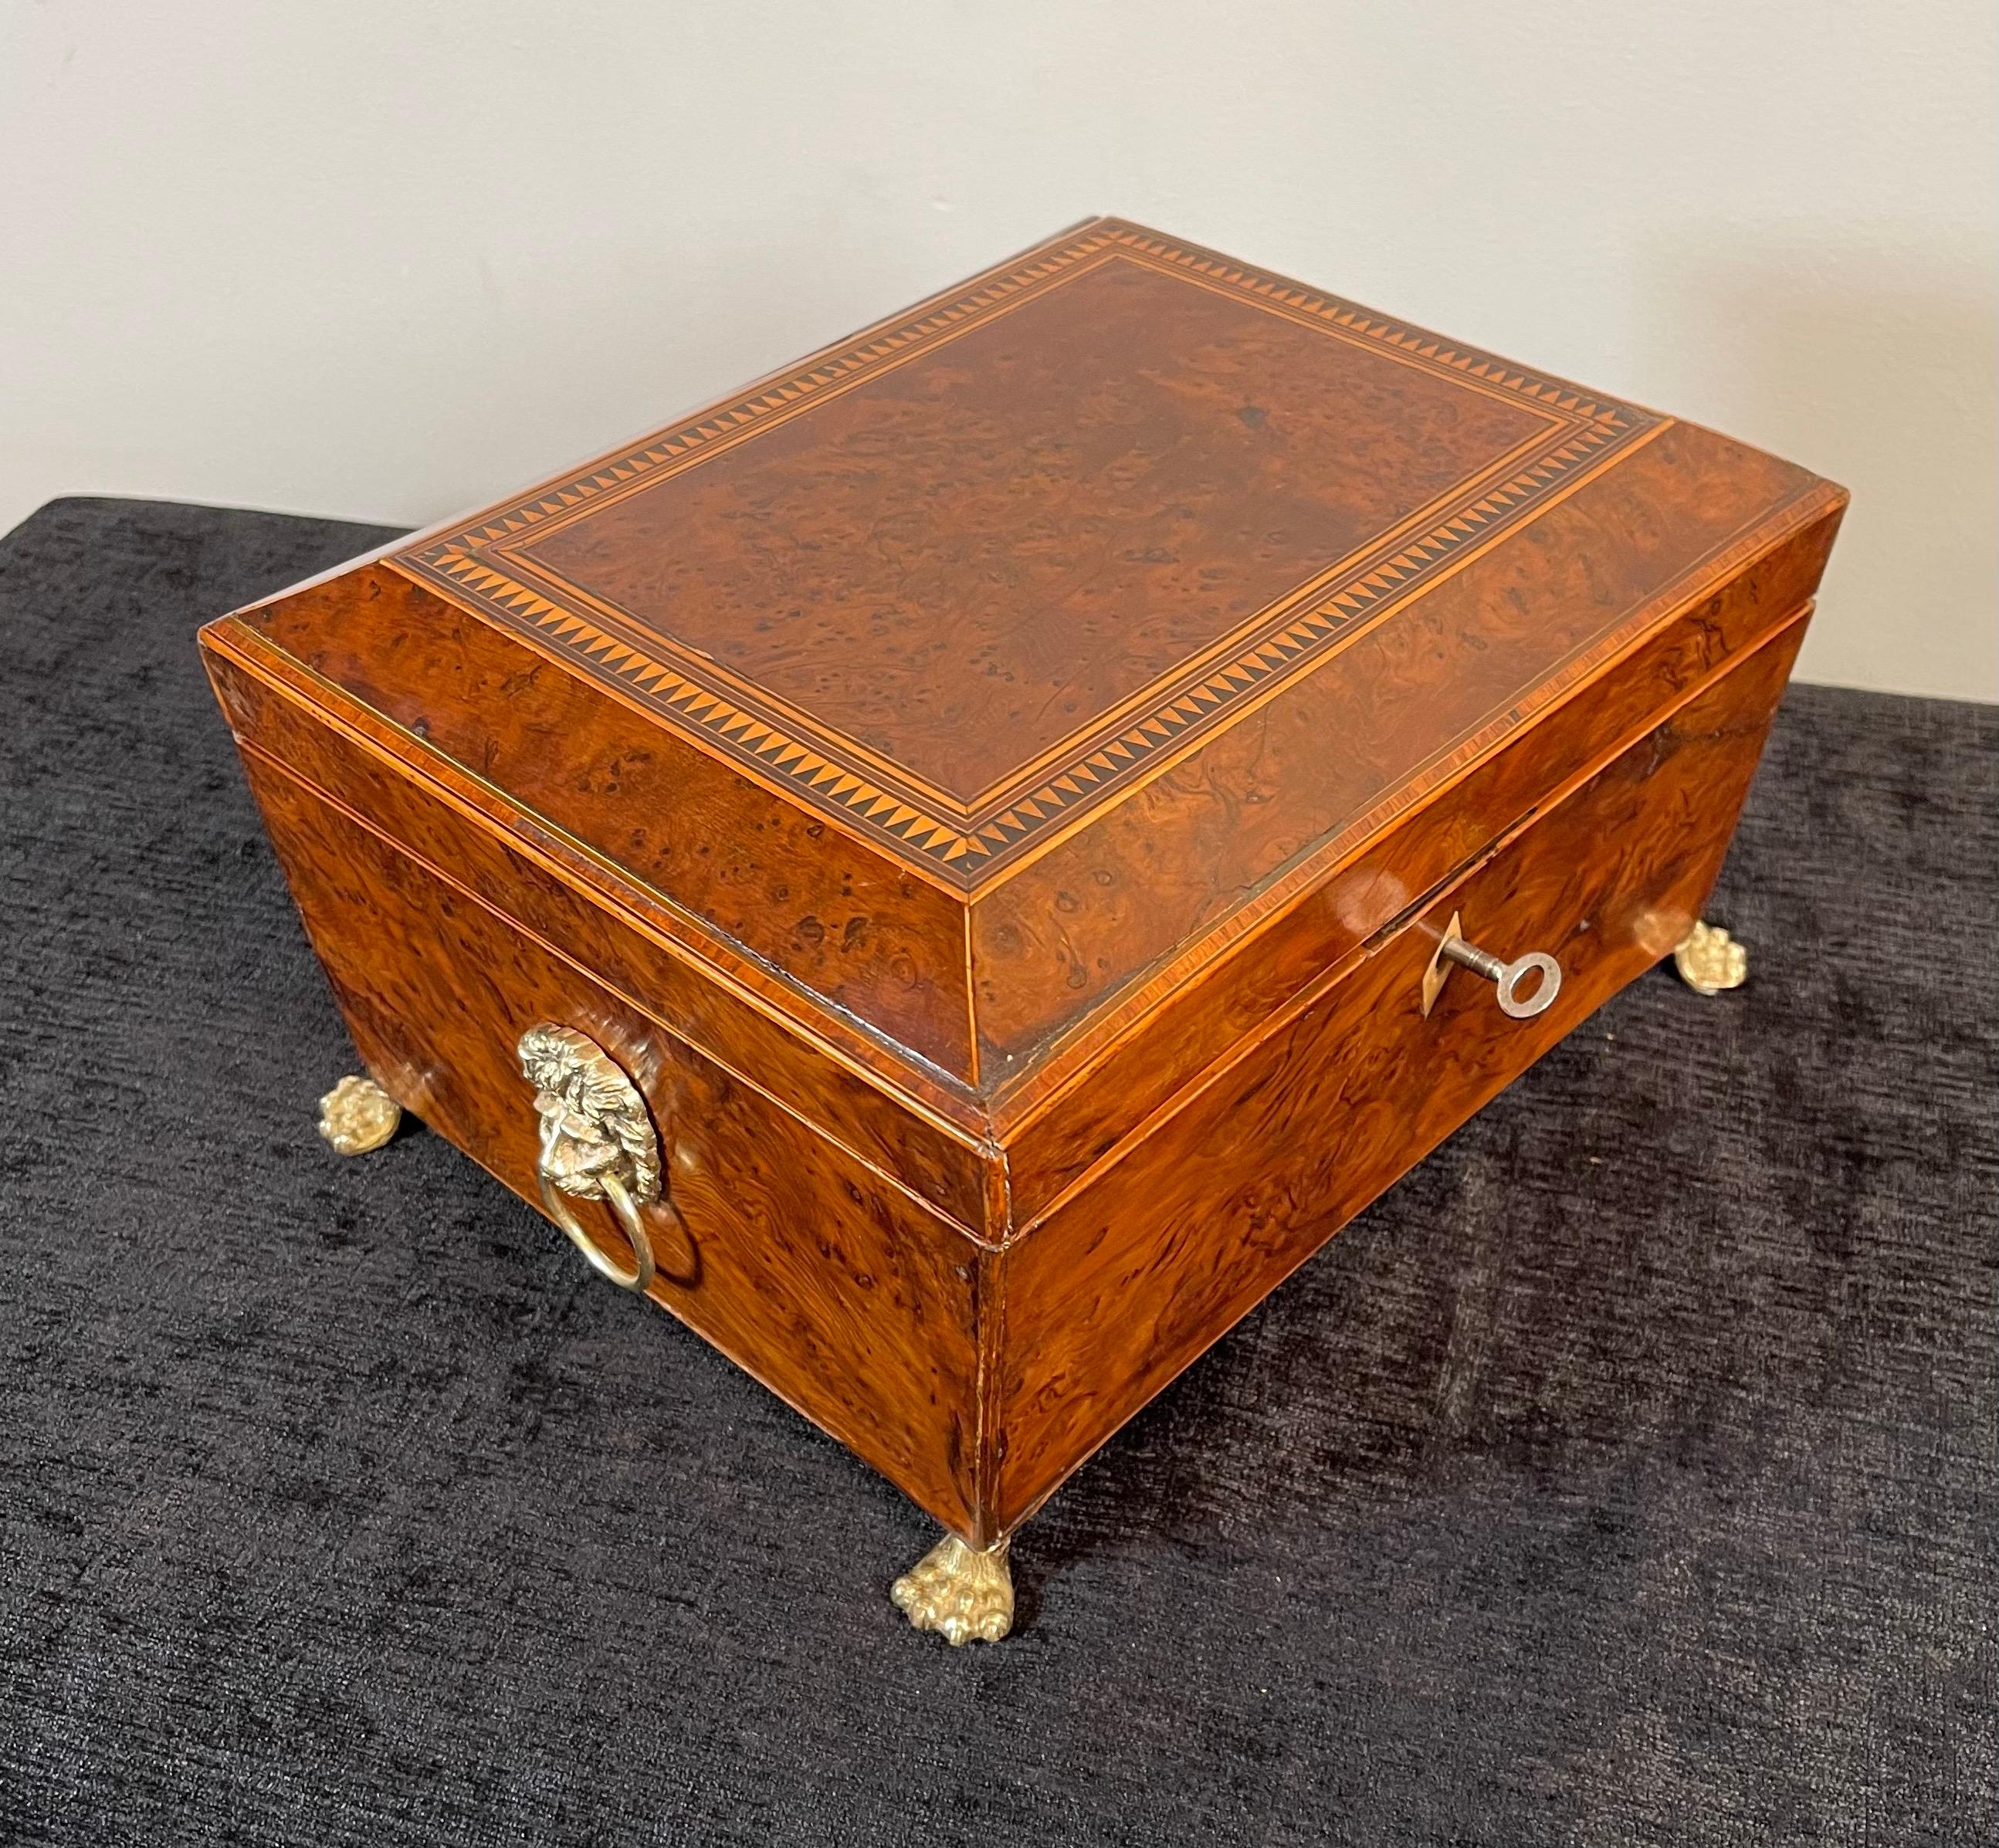 Regency birdseye maple sewing box with lions heads handles on each side & lions hairy paw feet with a key.